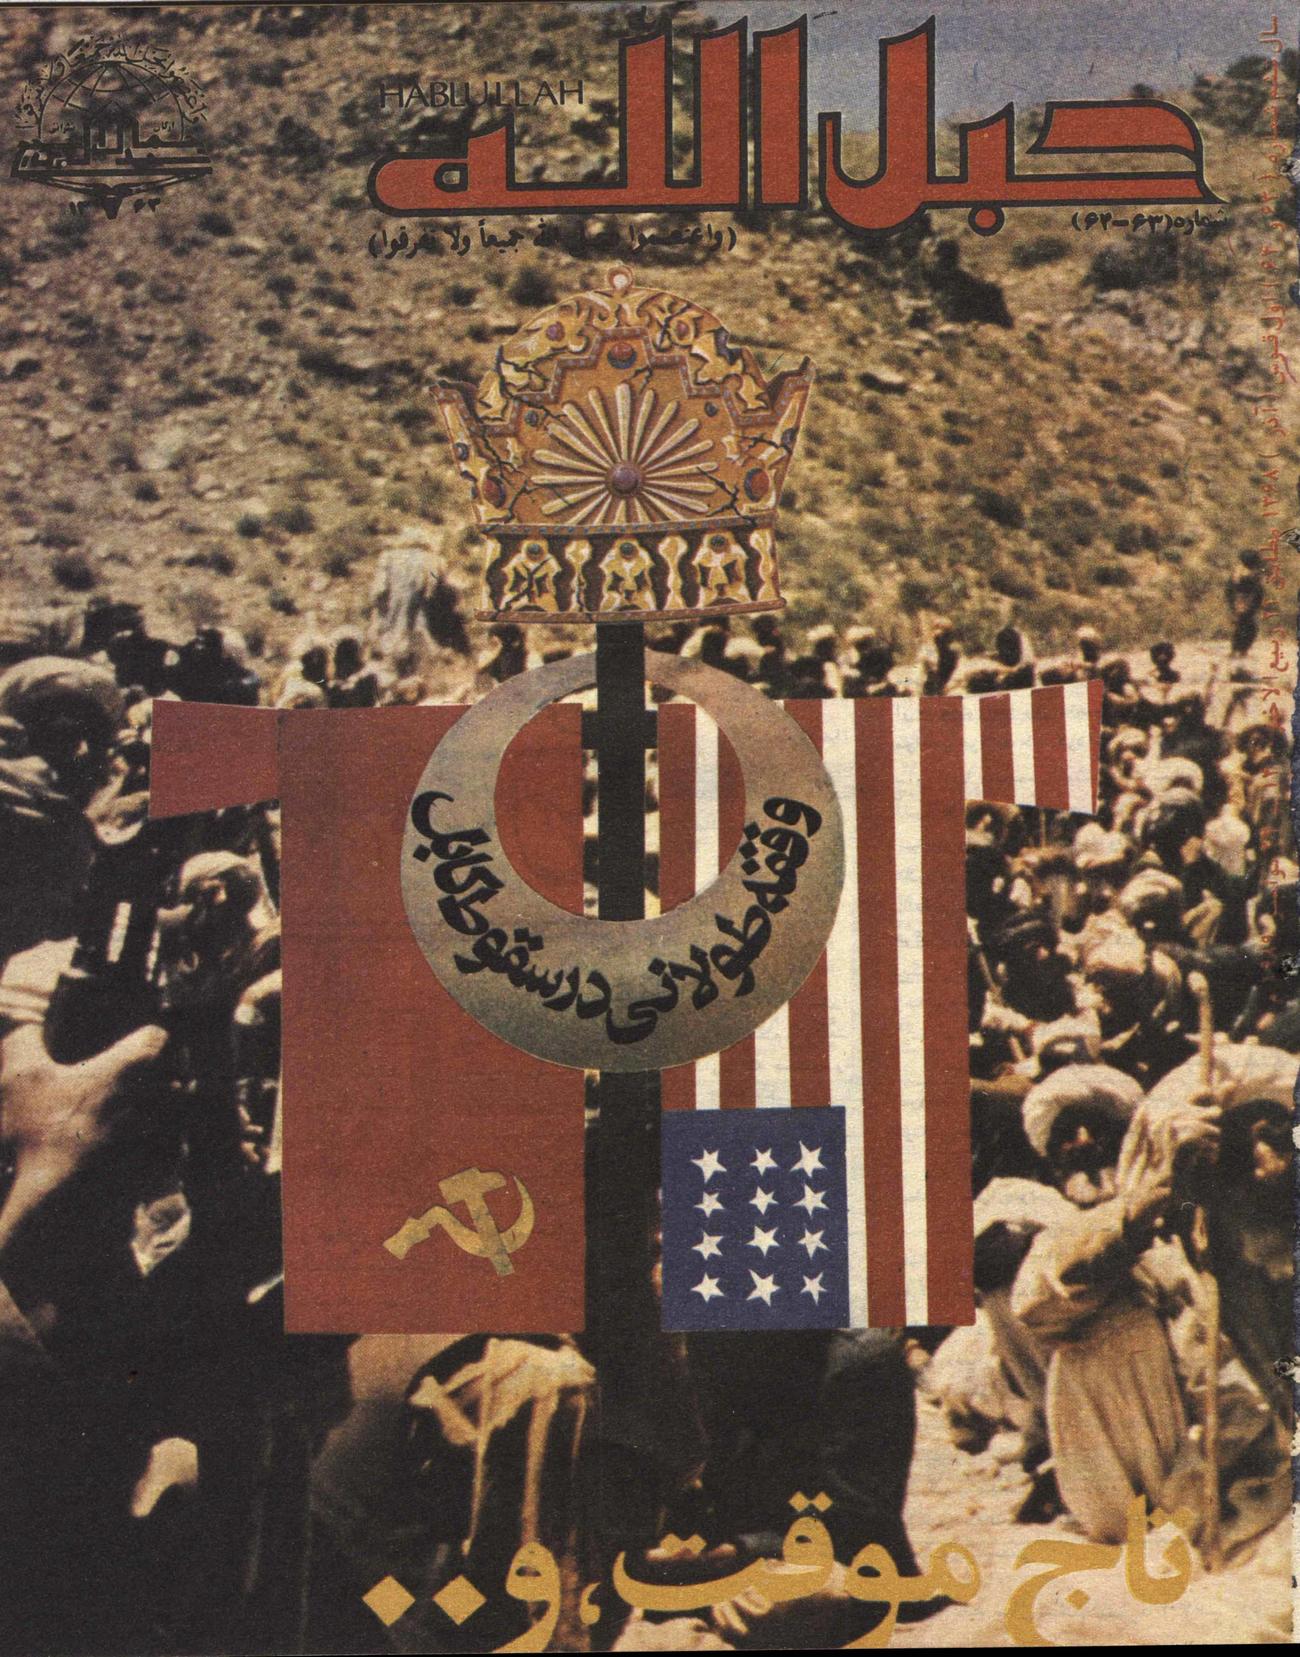 Image from the Cover of Habl ul-Allah, an Islamist magazine from the 1980s